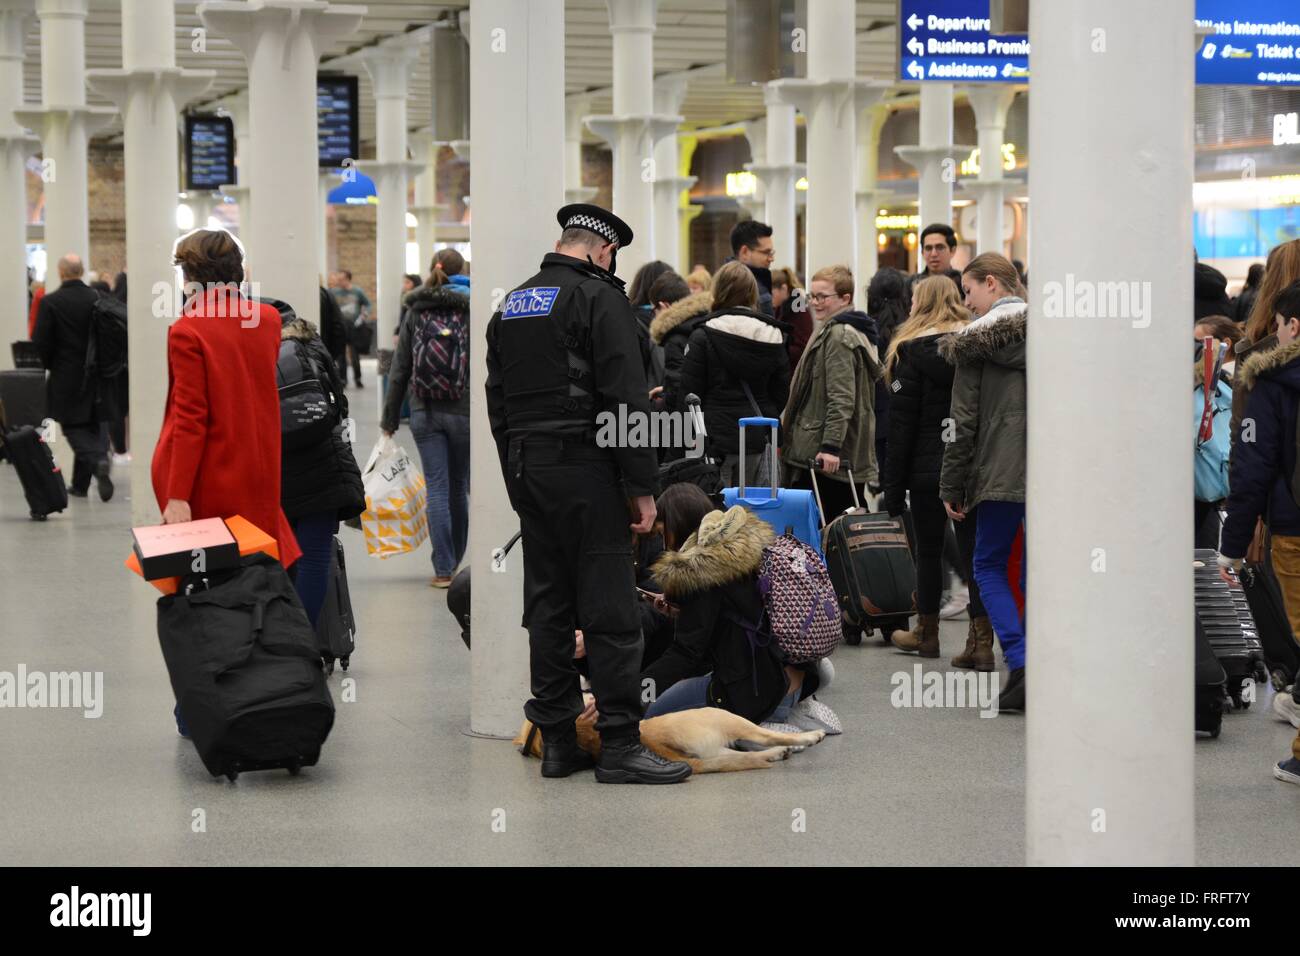 London, UK. 22nd March, 2016. Members of the public stroke Police sniffer dogs at the Eurostar terminal, London. Credit: Marc Ward/Alamy Live News Stock Photo